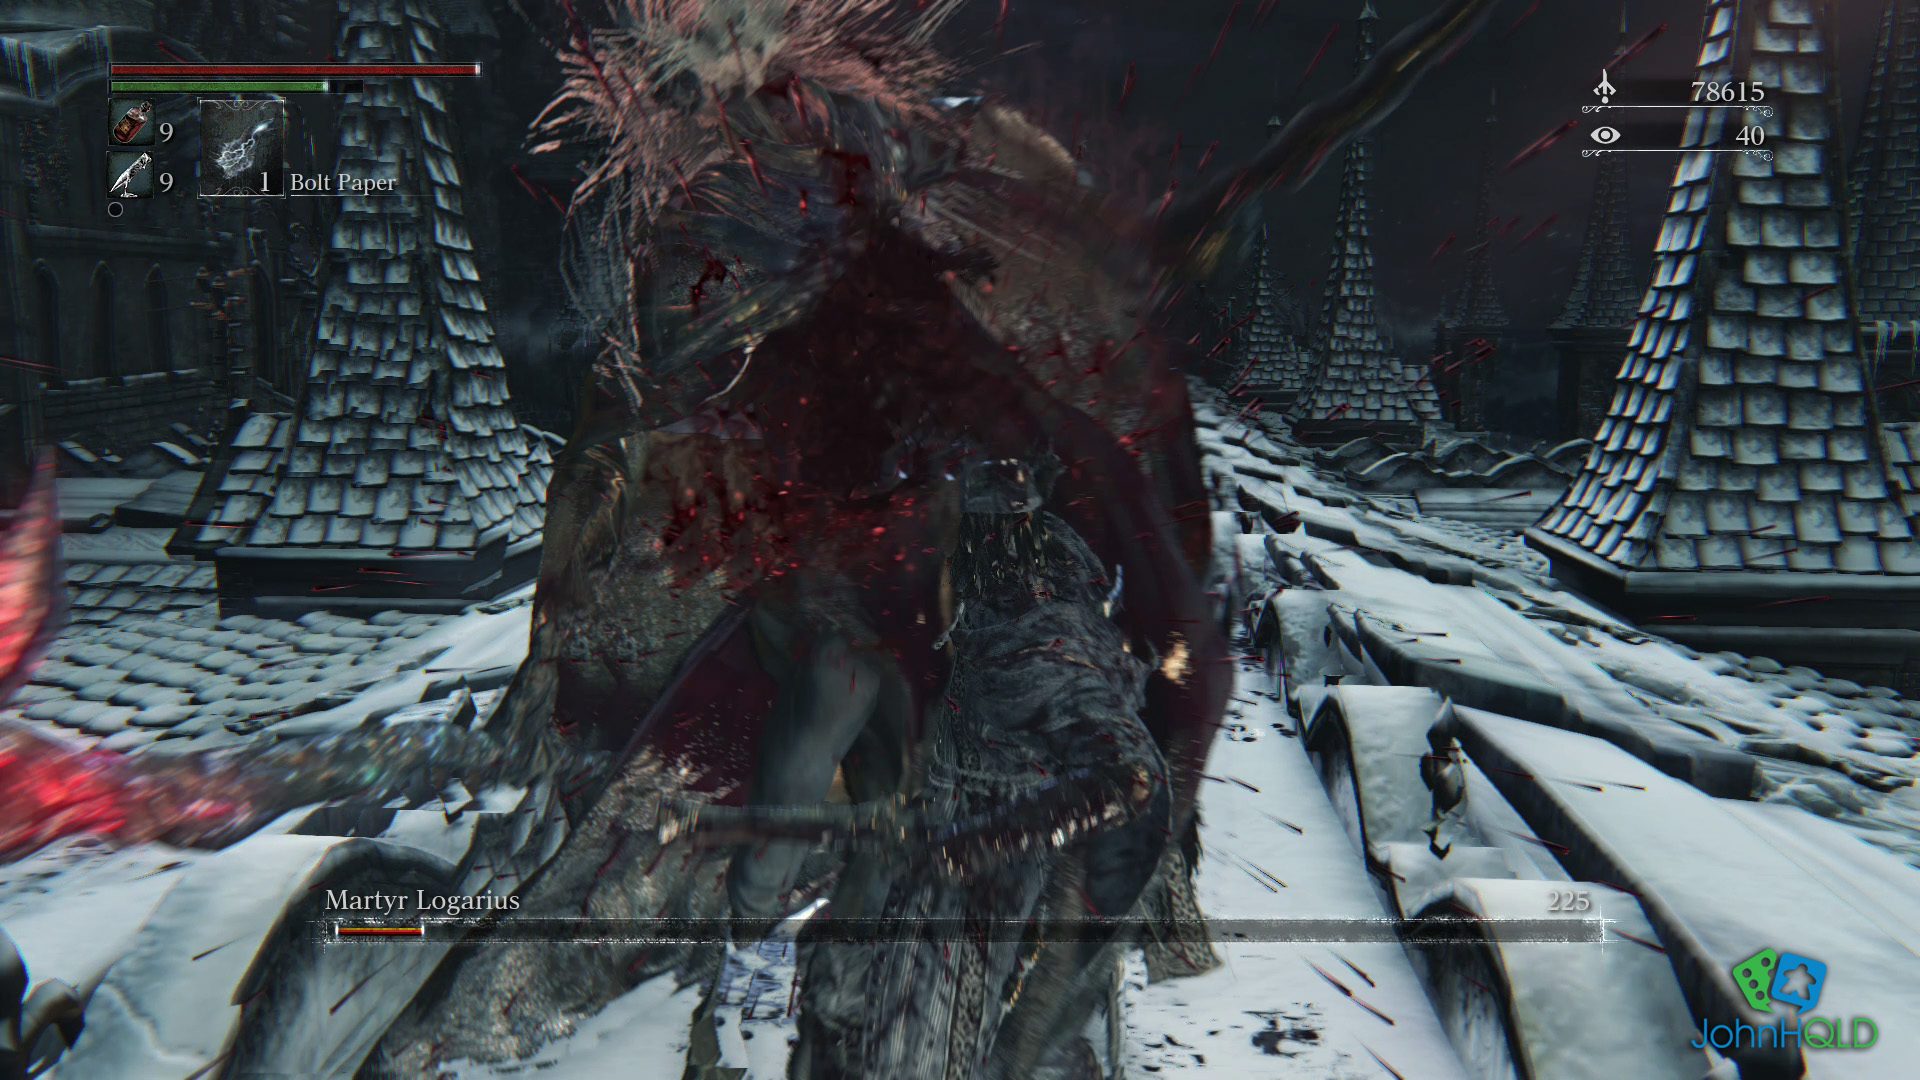 20221121 - Bloodborne - Gandalf down with a visceral attack